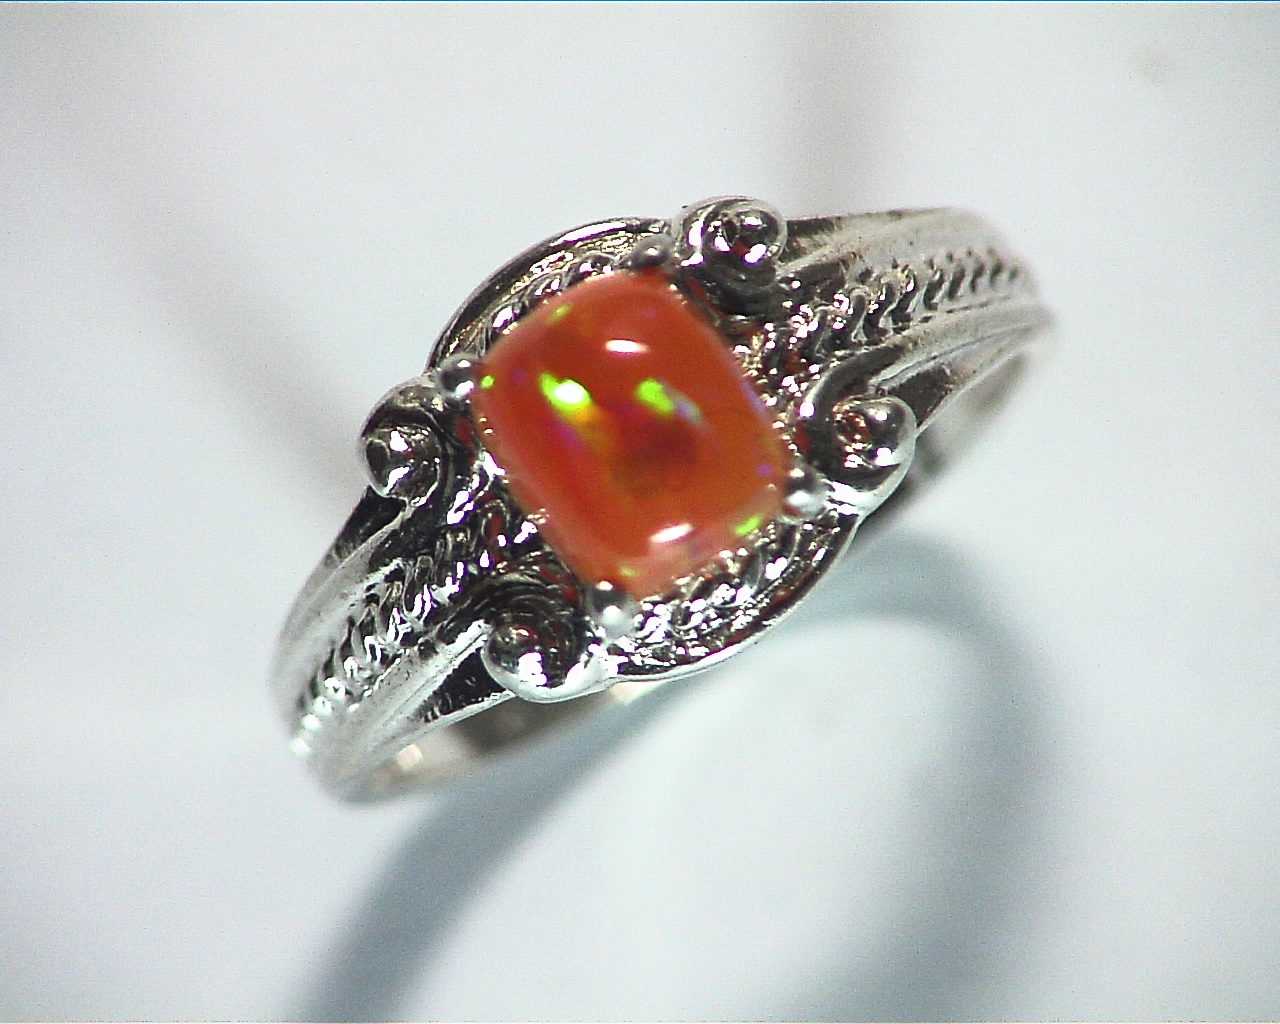 Opal (Mexican) Genuine Gemstone in Sterling Silver Ring RSS,602 6